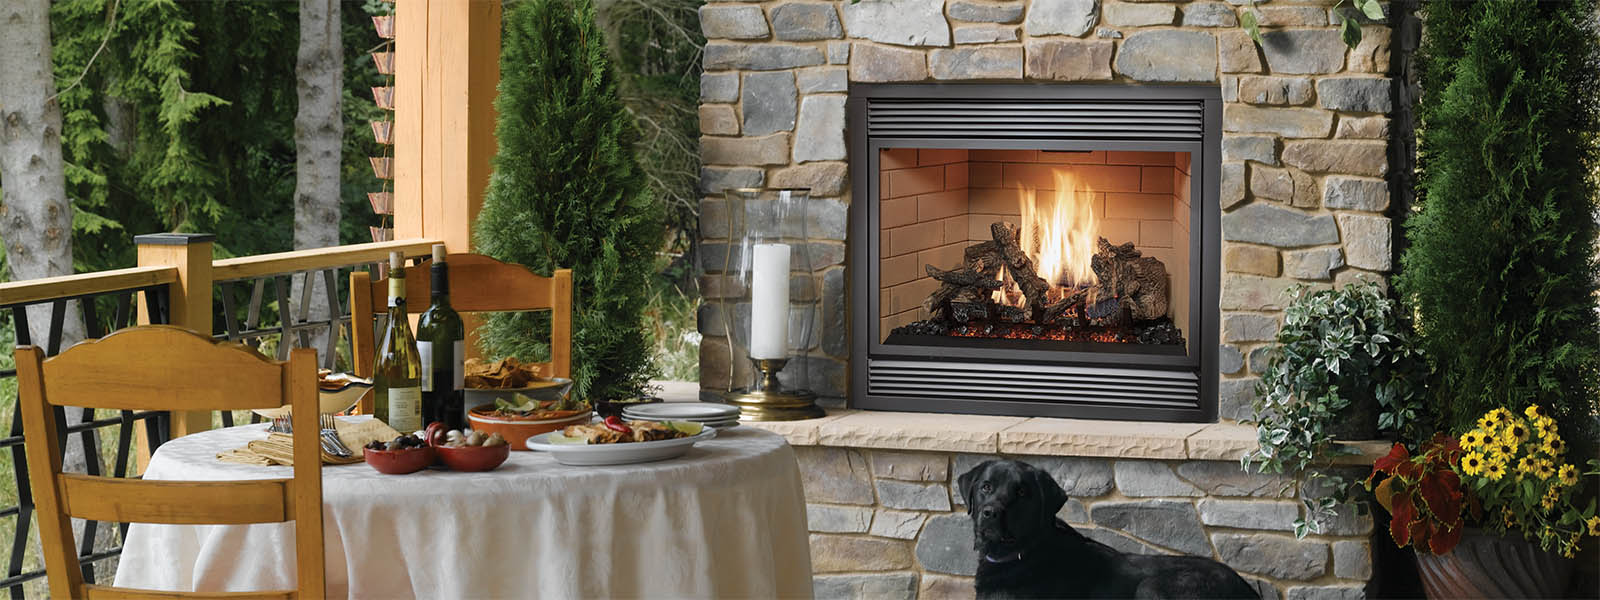 FireplaceX Traditional Premium Gas Fireplaces